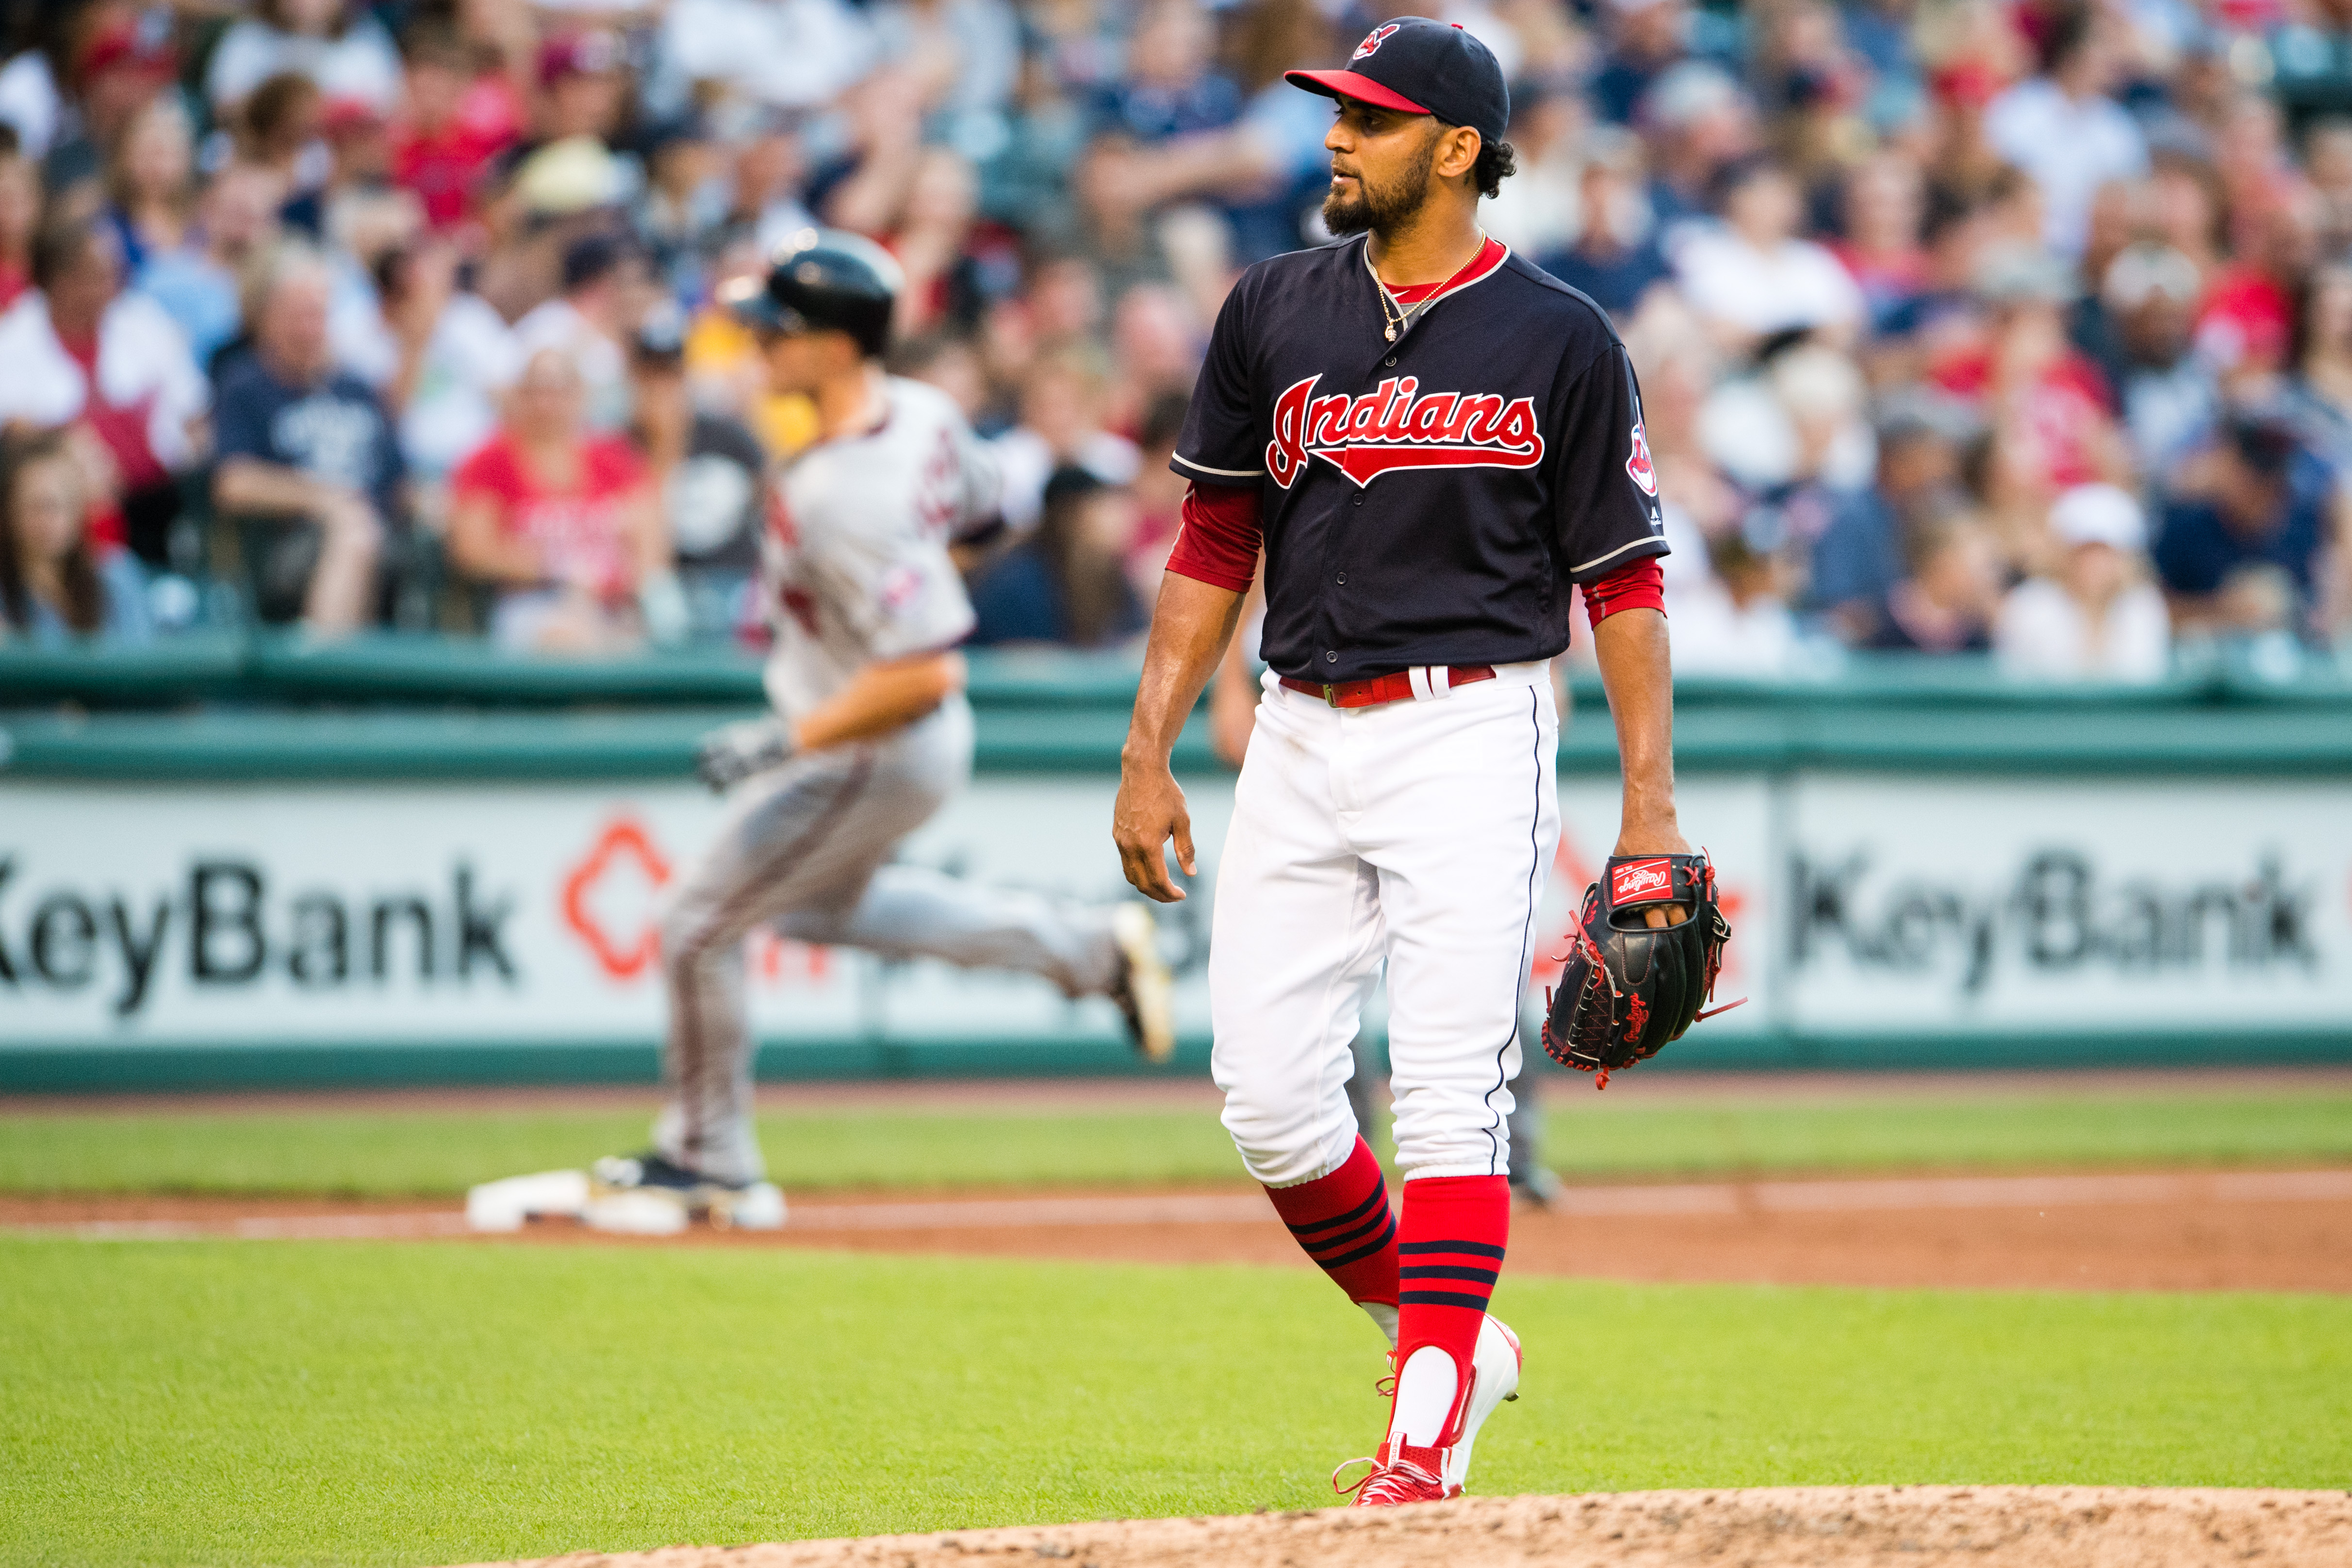 Danny Salazar returned from the DL, but was rusty to say the least.